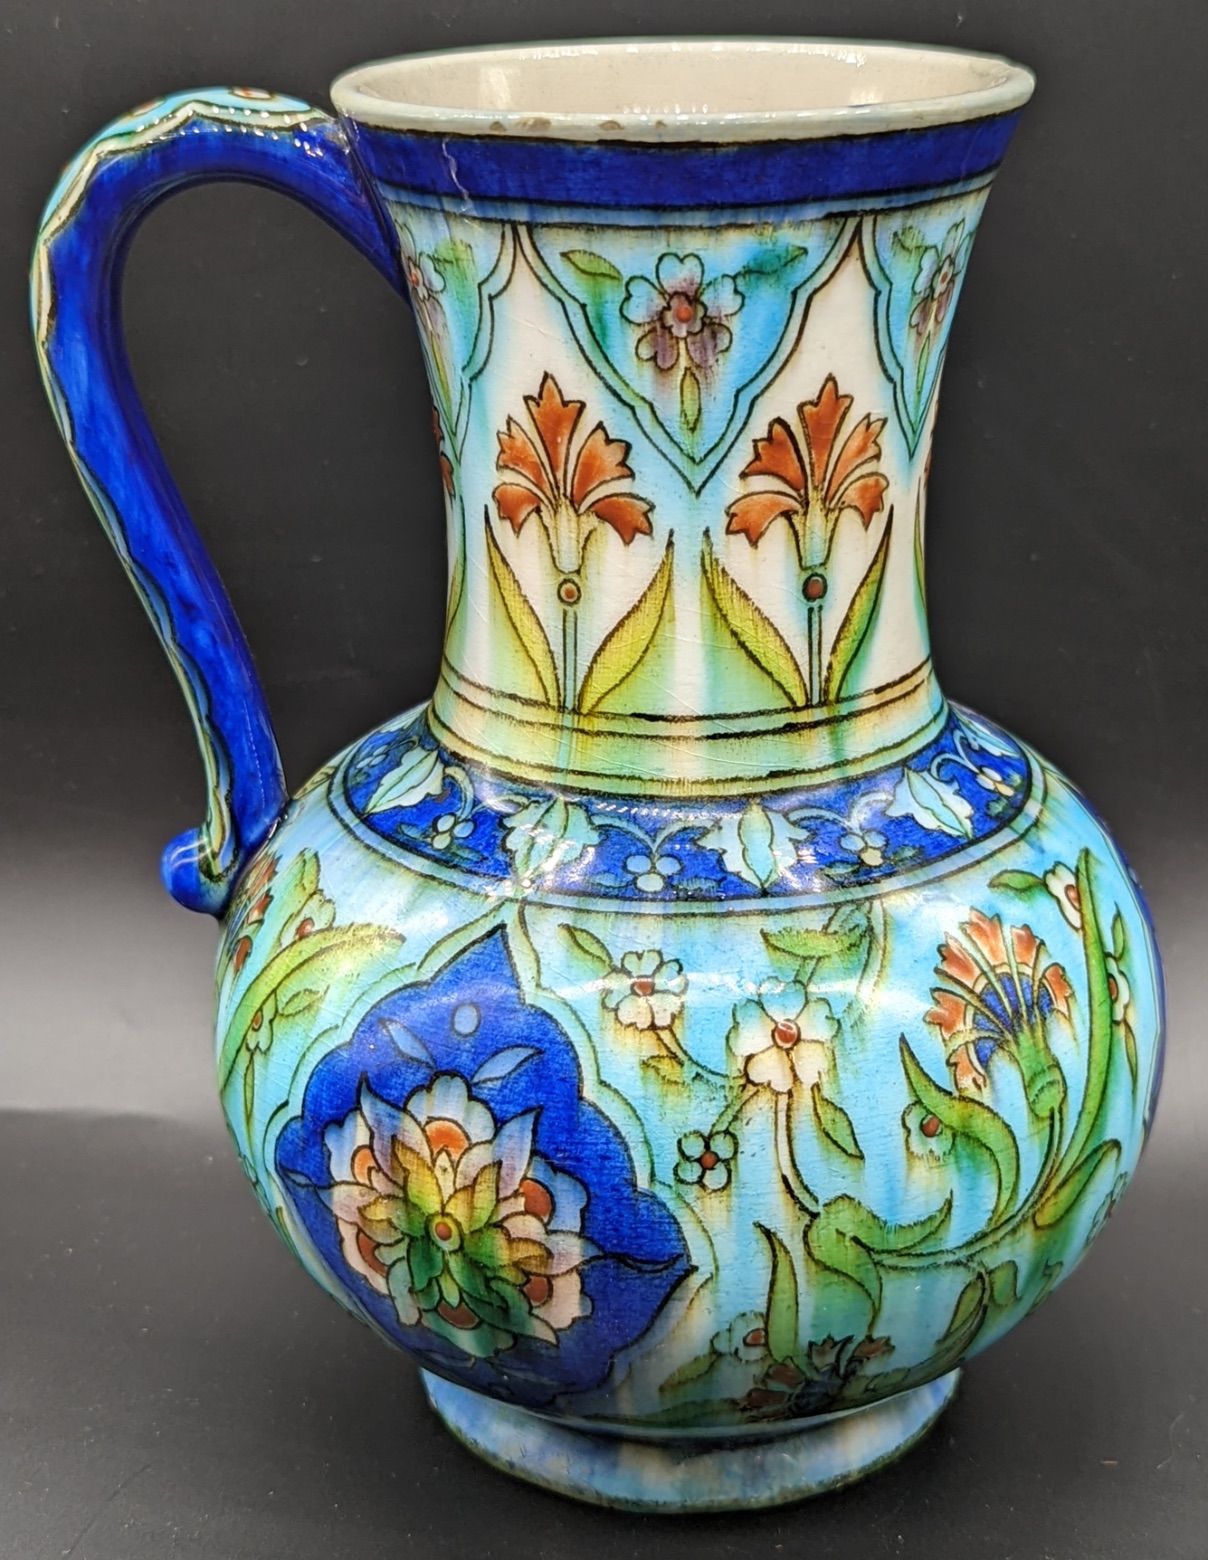 Théodore A late 19th century French Theodore deck jug in the Iznik style, H.19cm